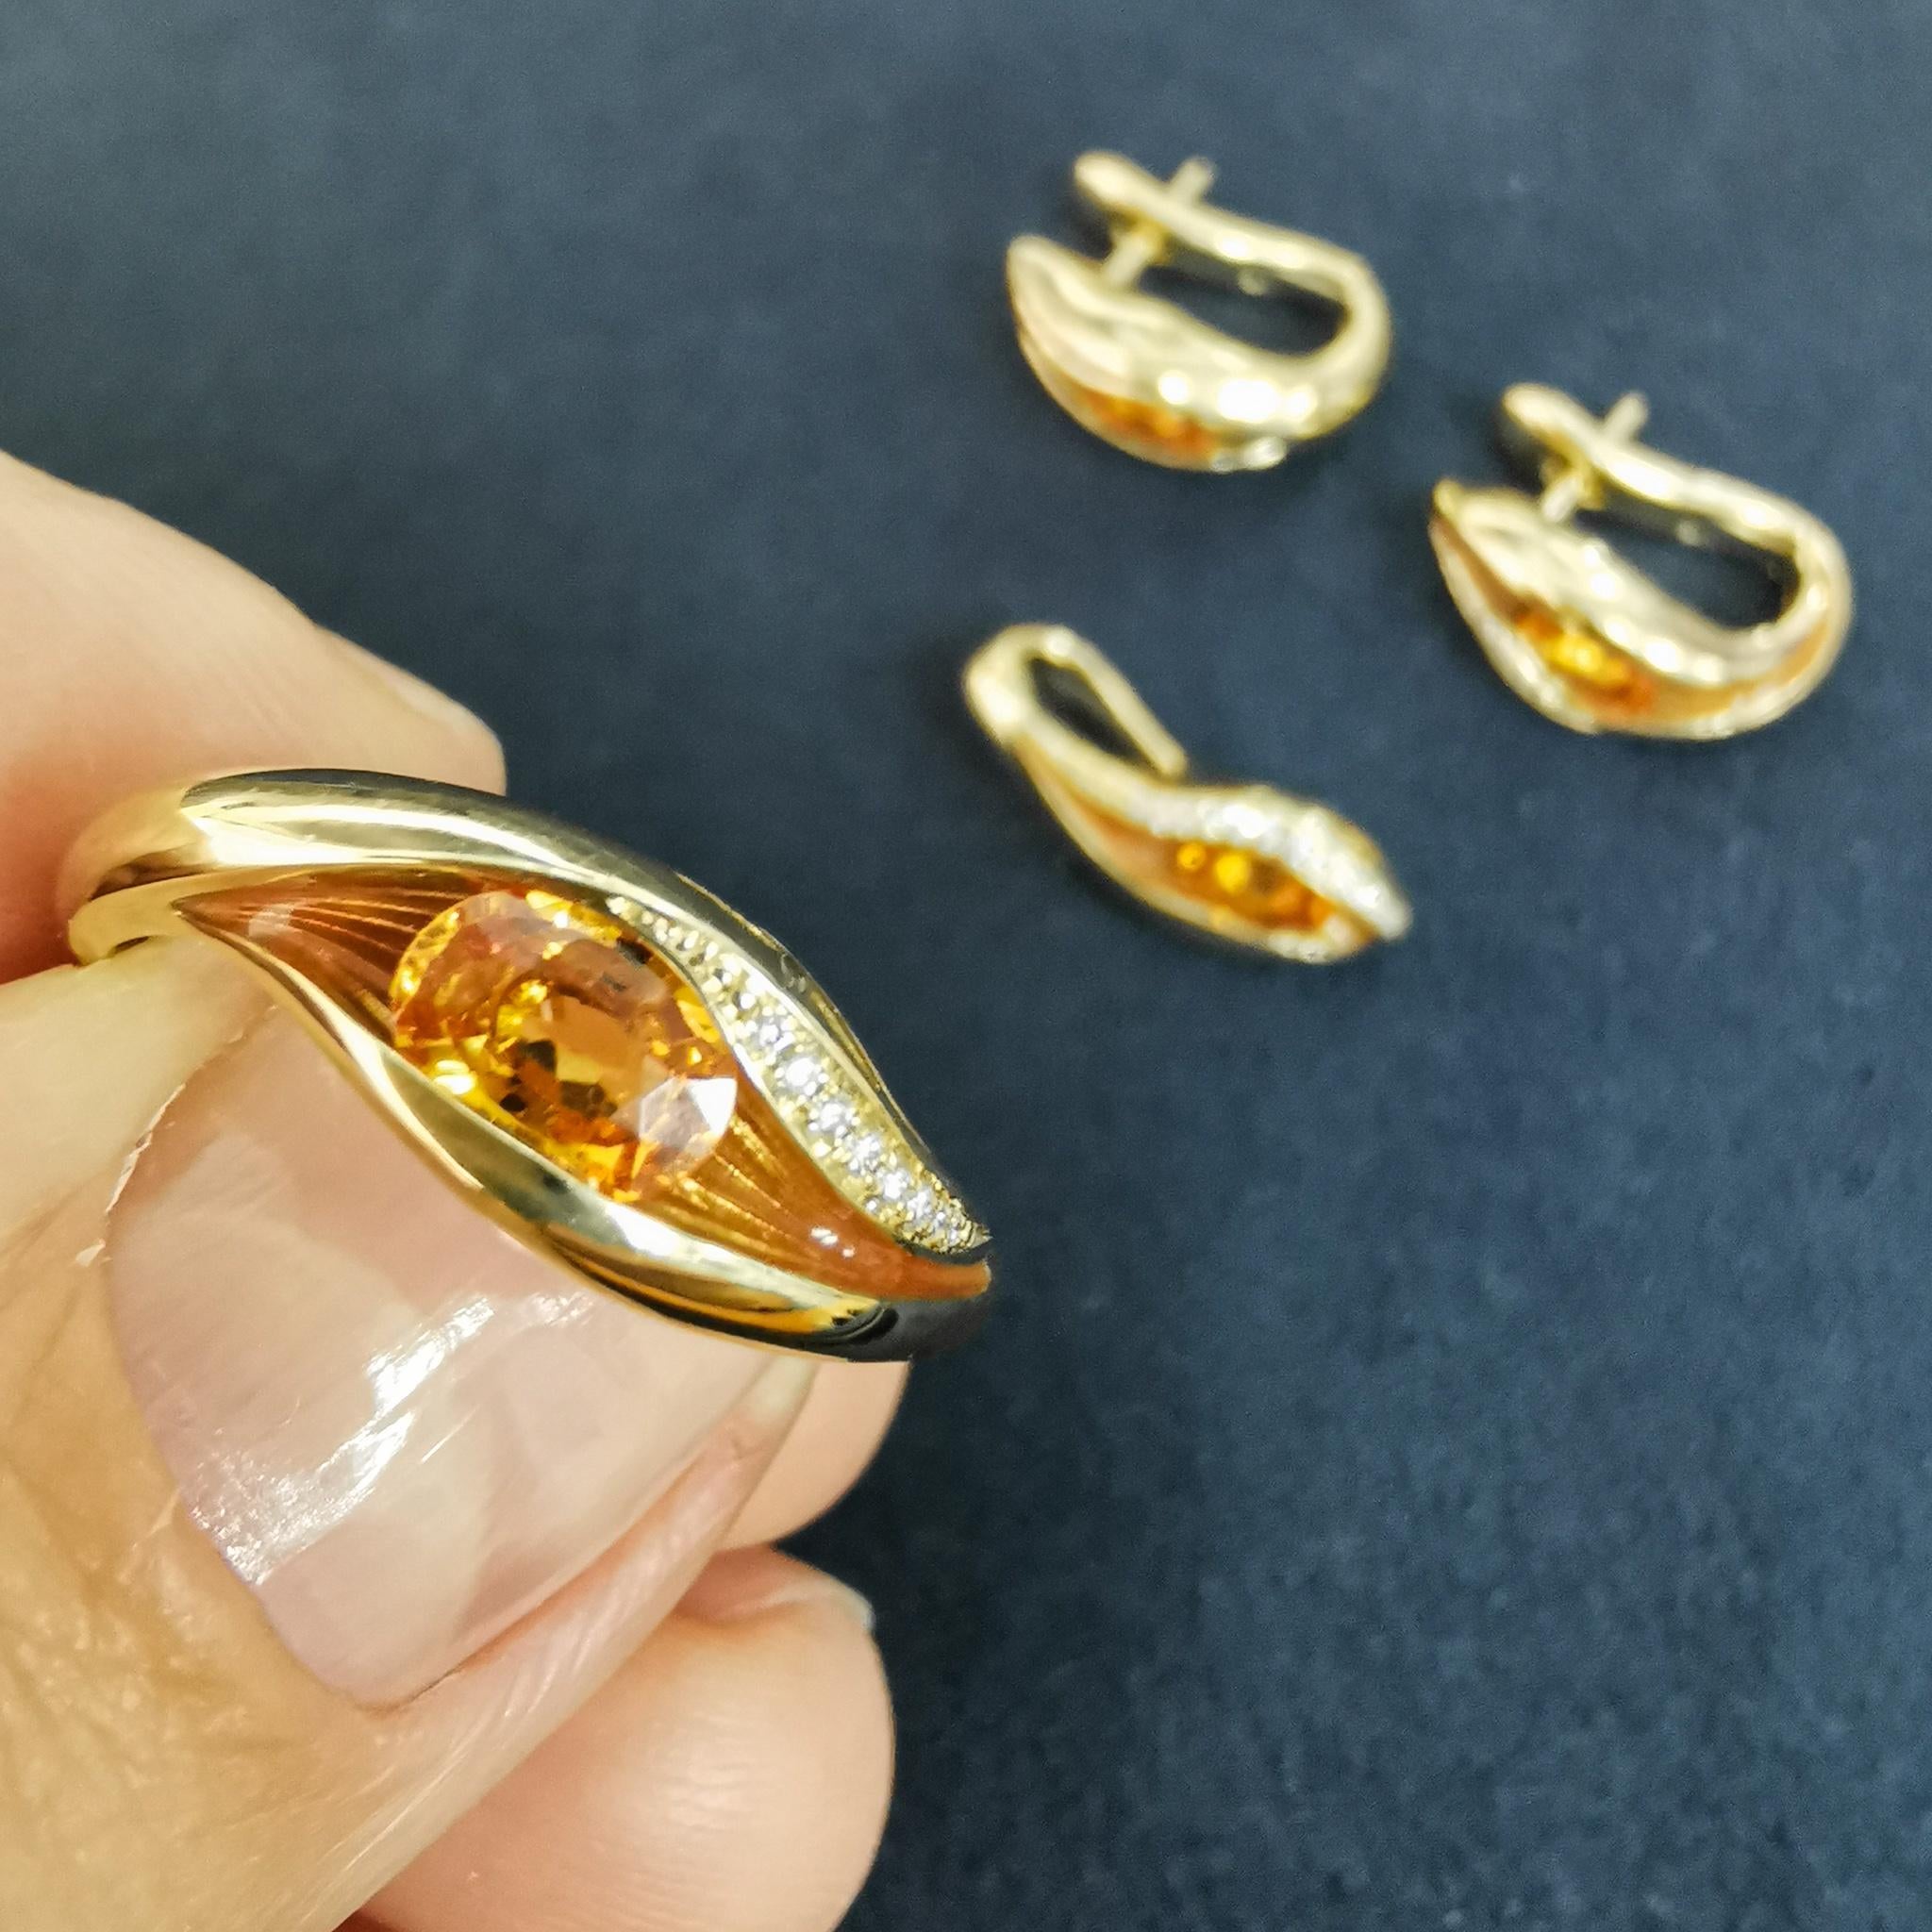 Spessartine Diamonds Enamel 18 Karat Yellow Gold Melted Colors Suite
Our new collection 